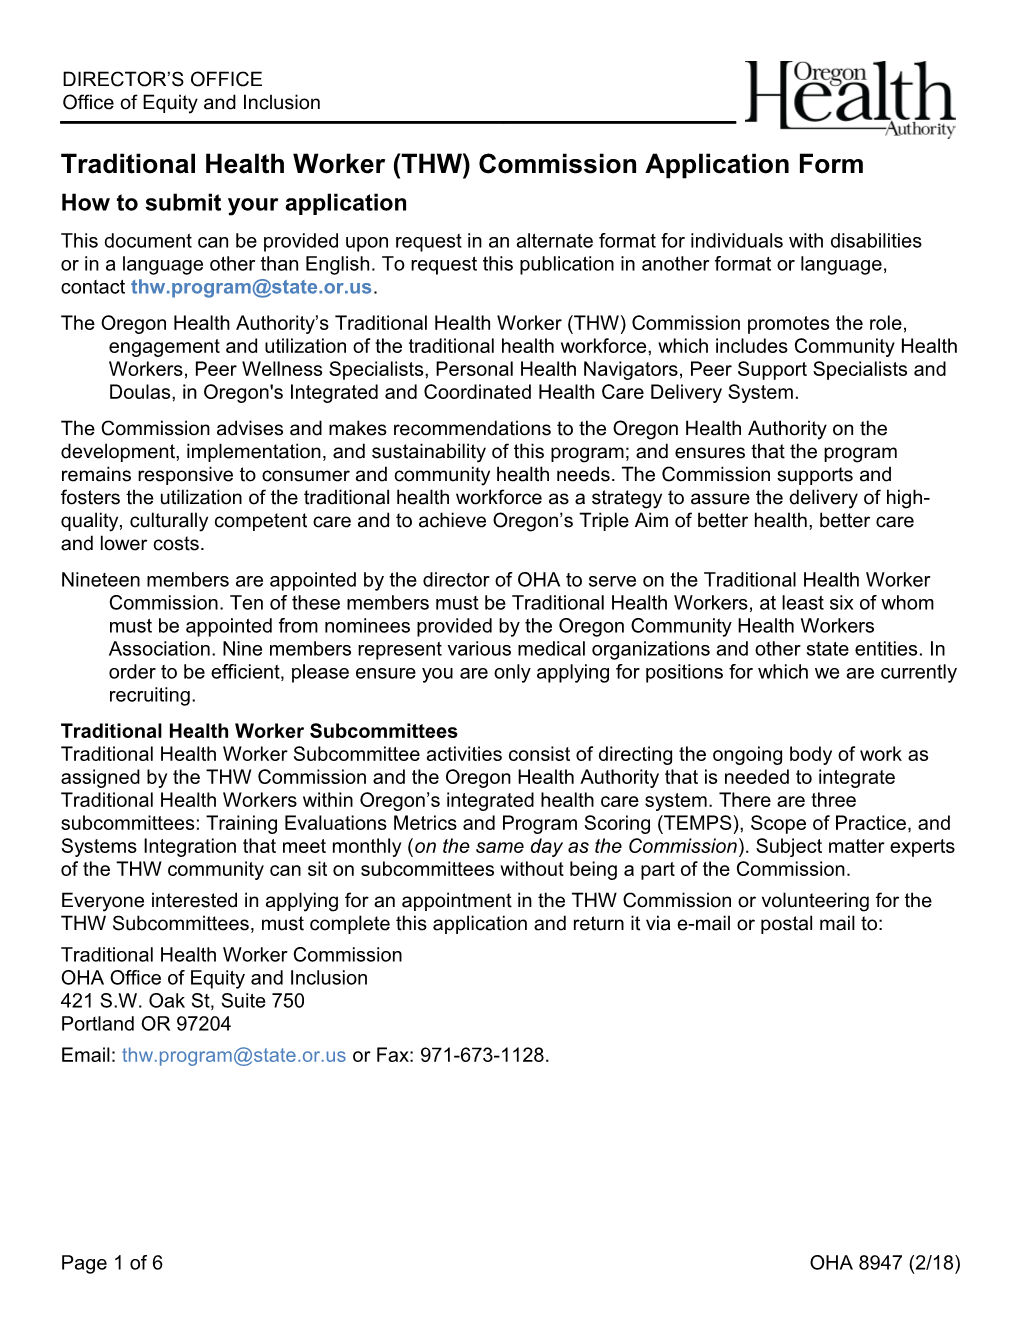 Traditional Health Worker Full Certification and Registry Enrollment Application